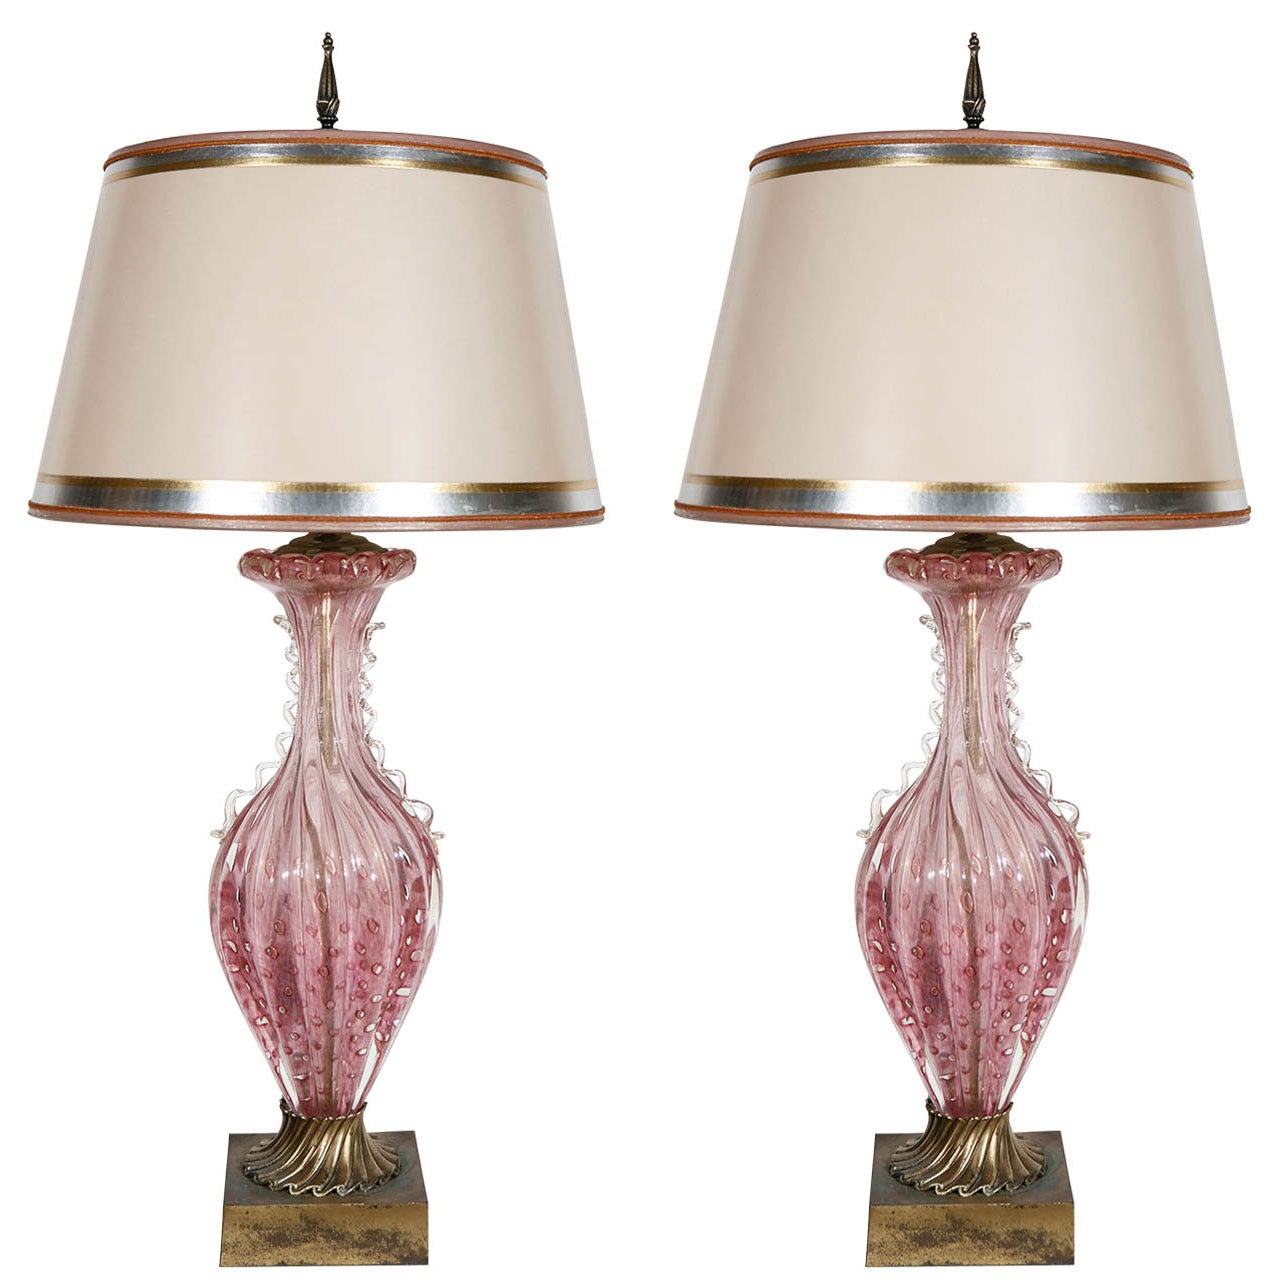 Pair of Midcentury Pink Murano Lamps with Gold Flecks